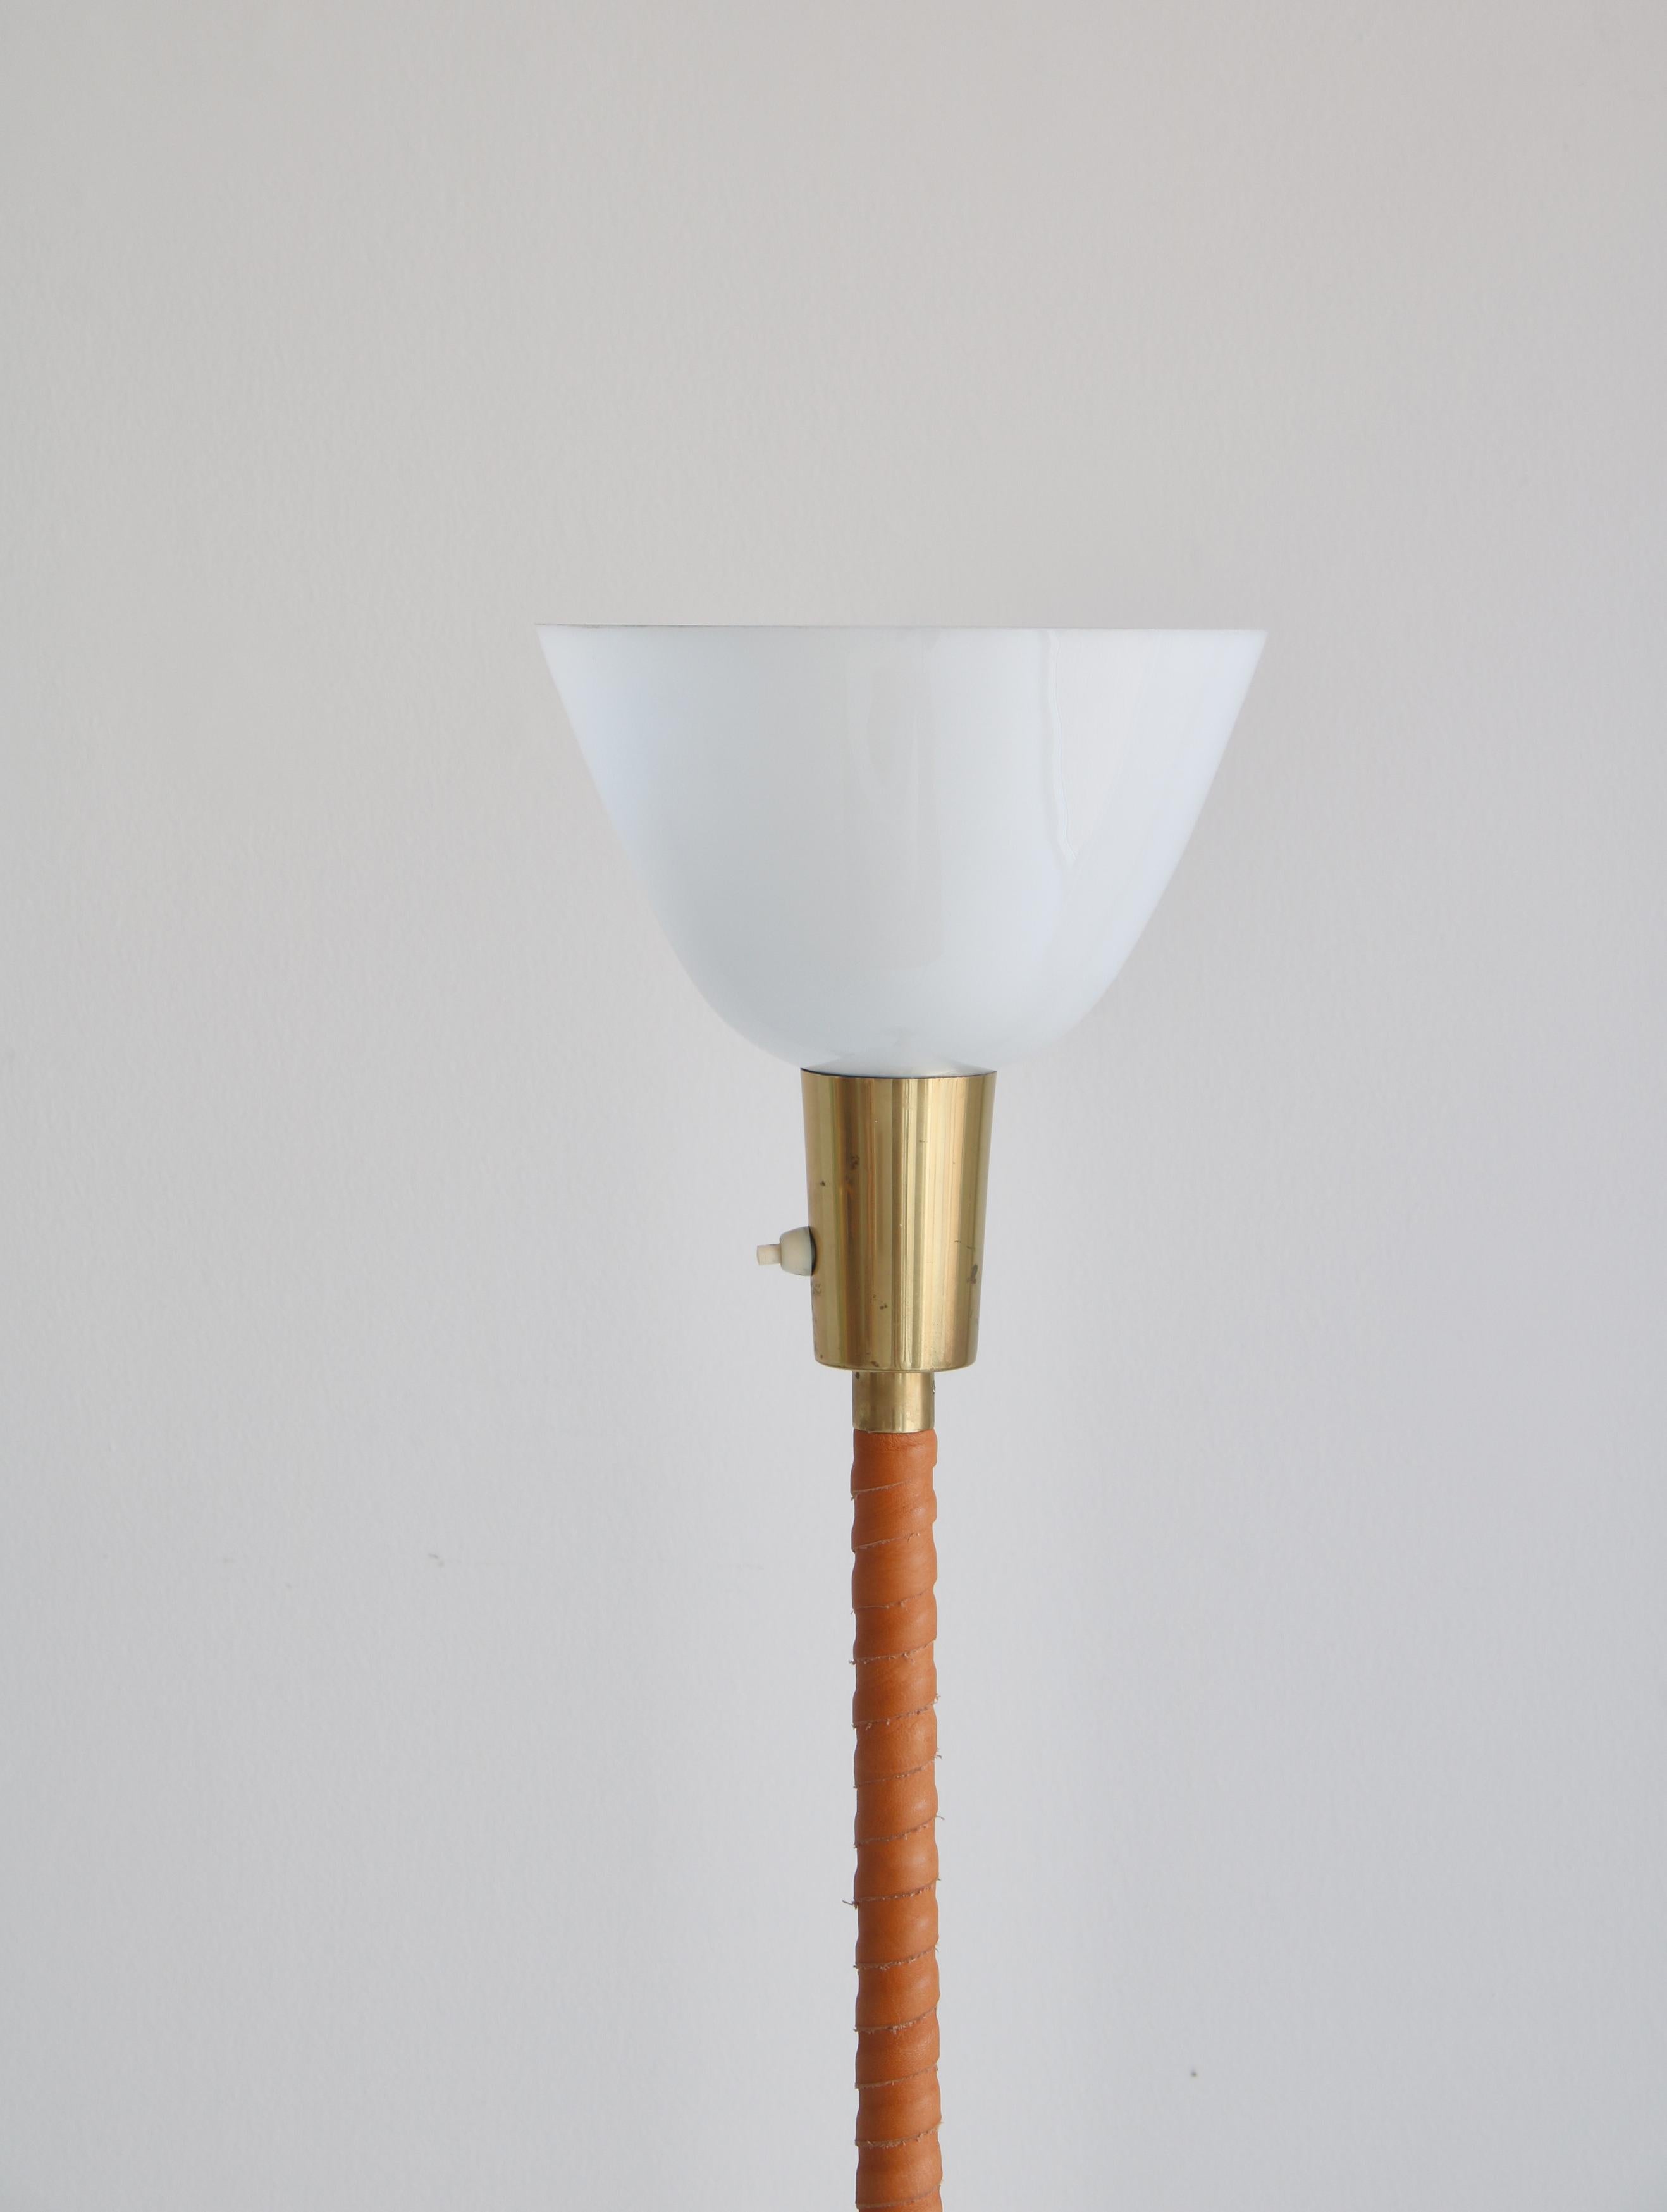 1950s Floor Lamp by Lisa Johansson-Pape in Brass and Leather for ORNO, Finland 1